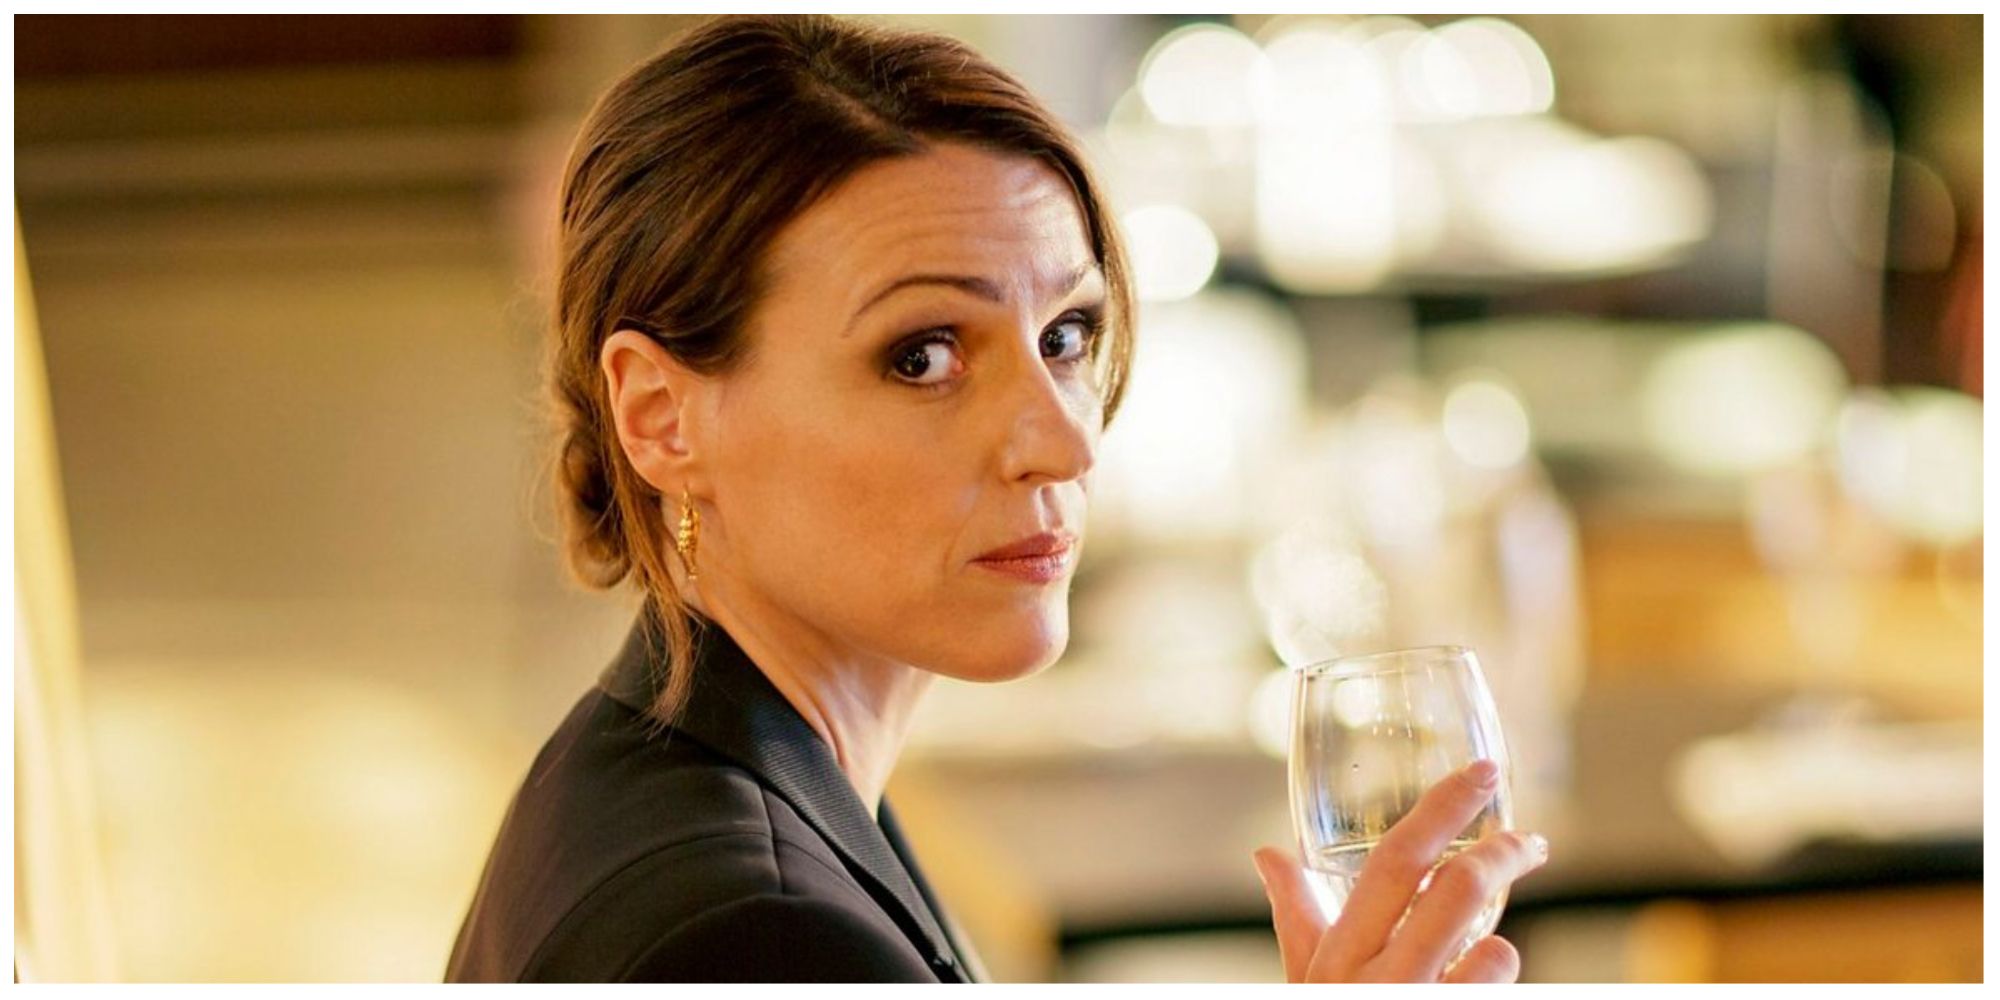 Suranne Jones as Doctor Foster looking sternly towards the camera with a drink in her hand